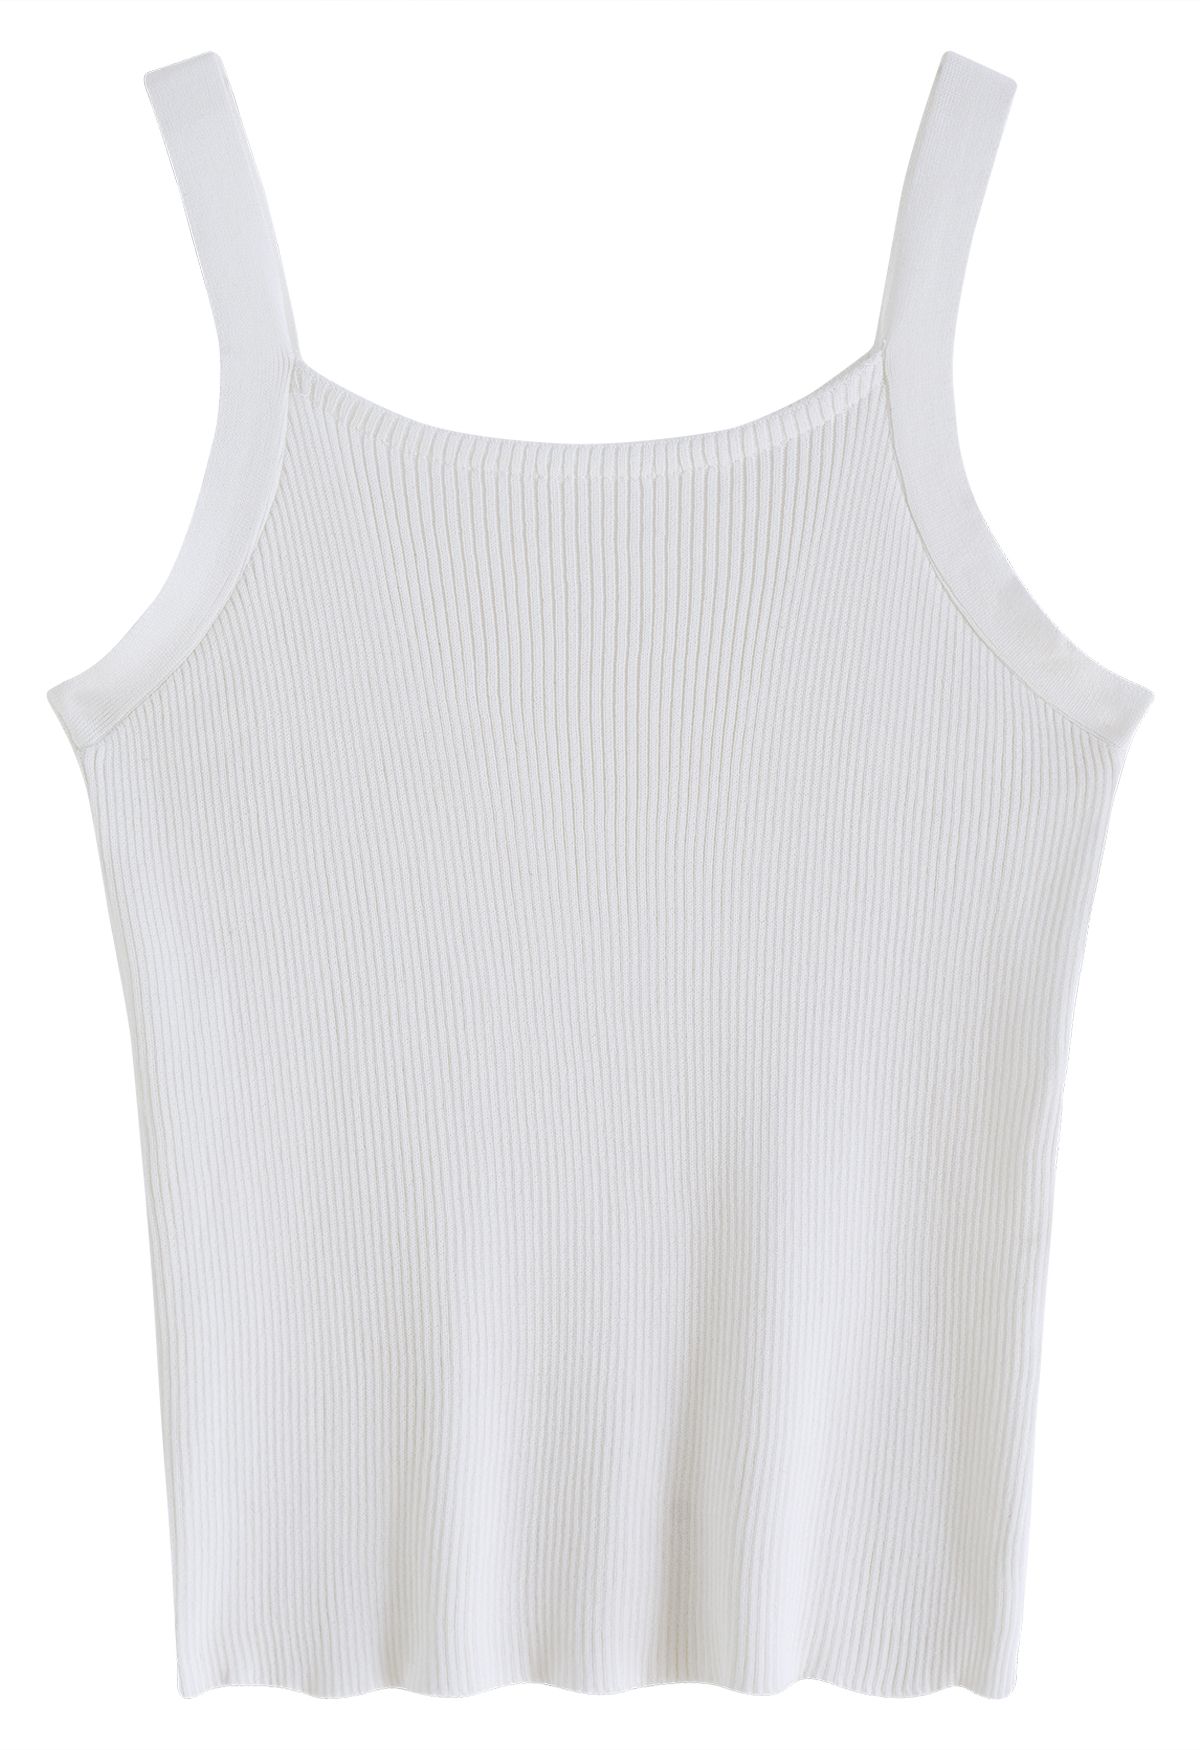 Stretchy Ribbed Knit Cami Top in White - Retro, Indie and Unique